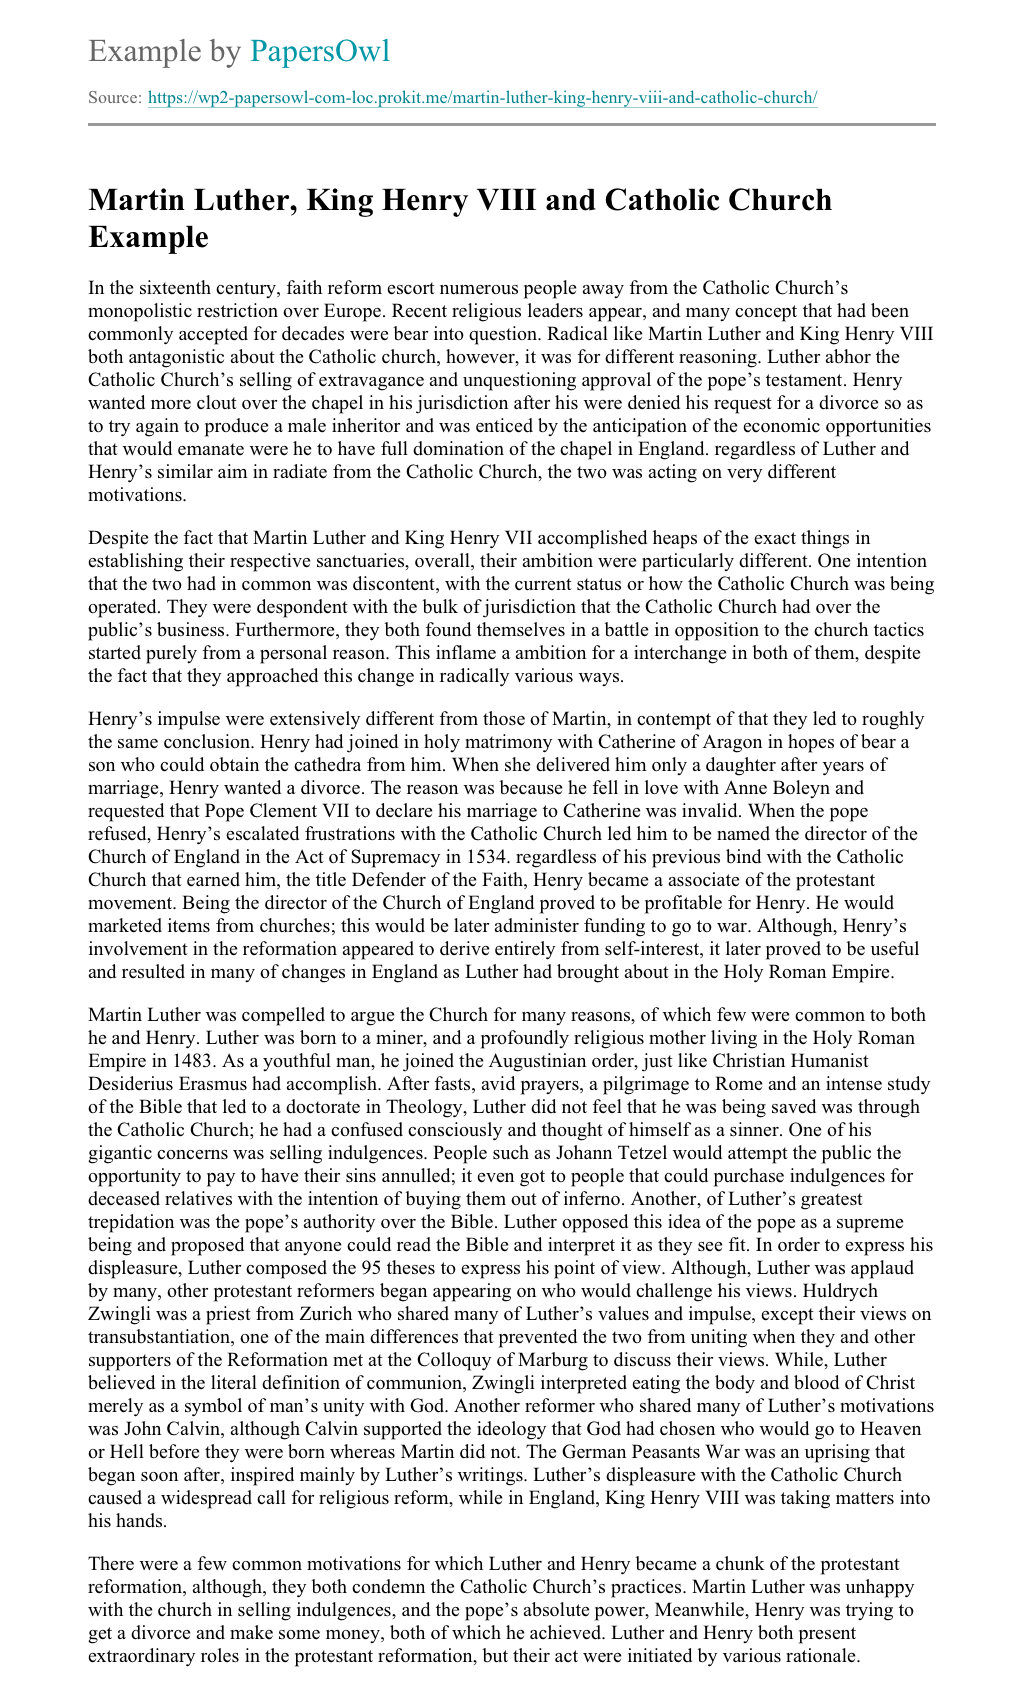 Essay on martin luther king